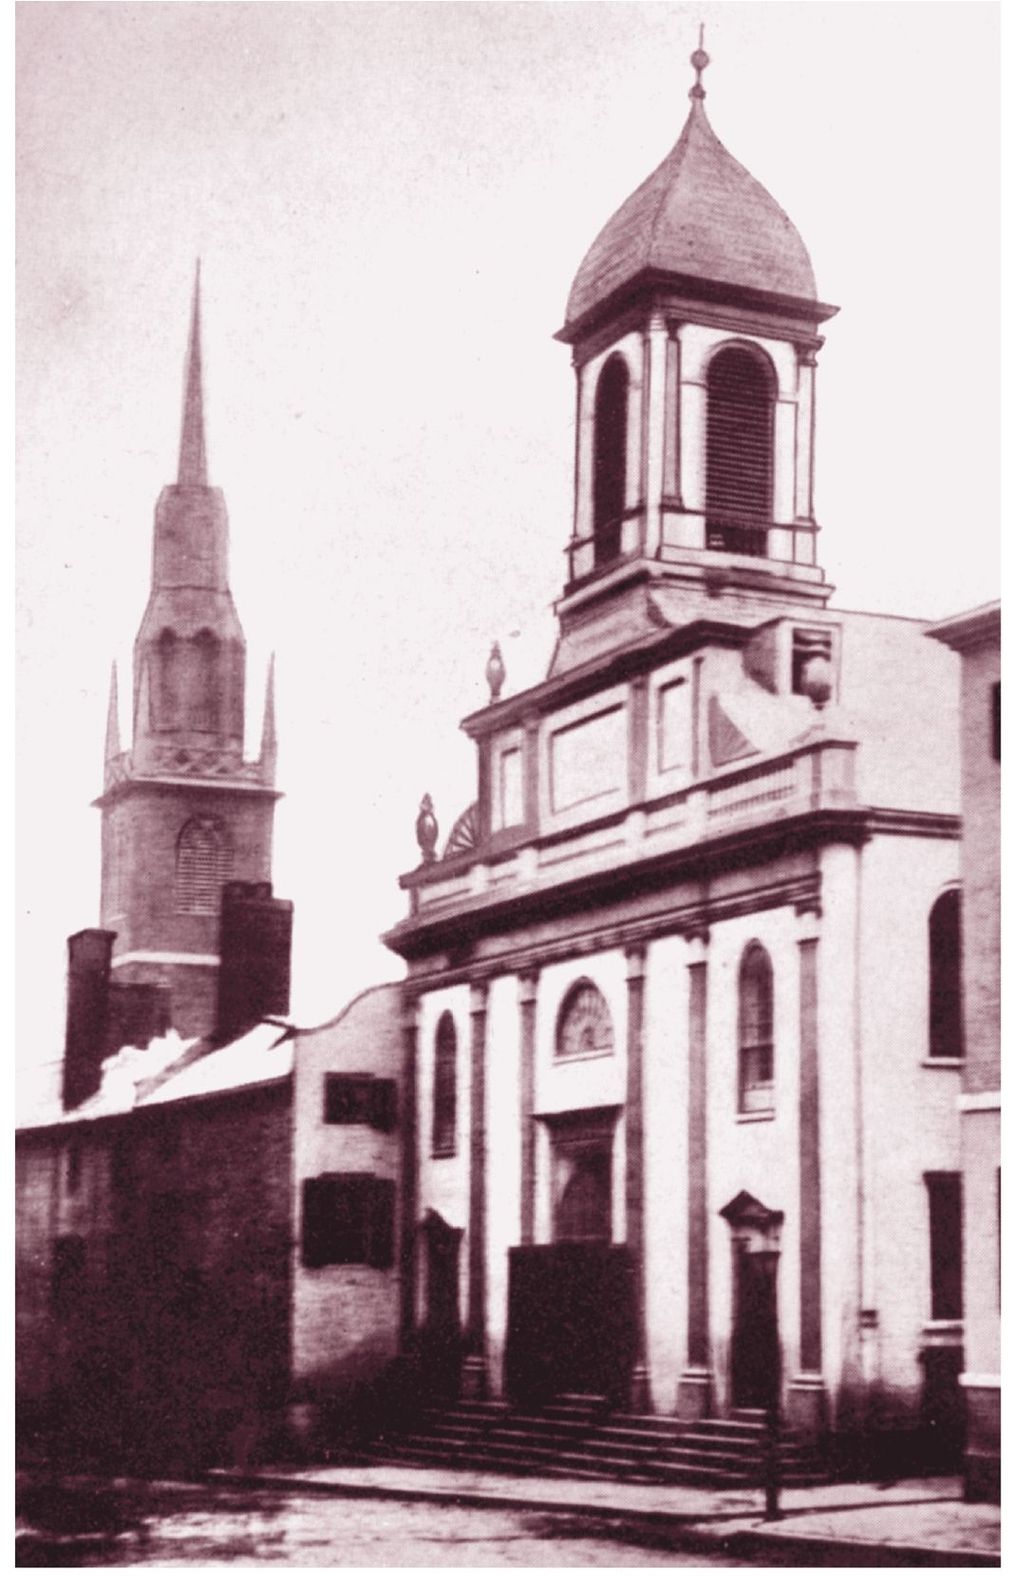 The Church of the Holy Cross designed by Charles Bulfinch was built in 1803 - photo 8